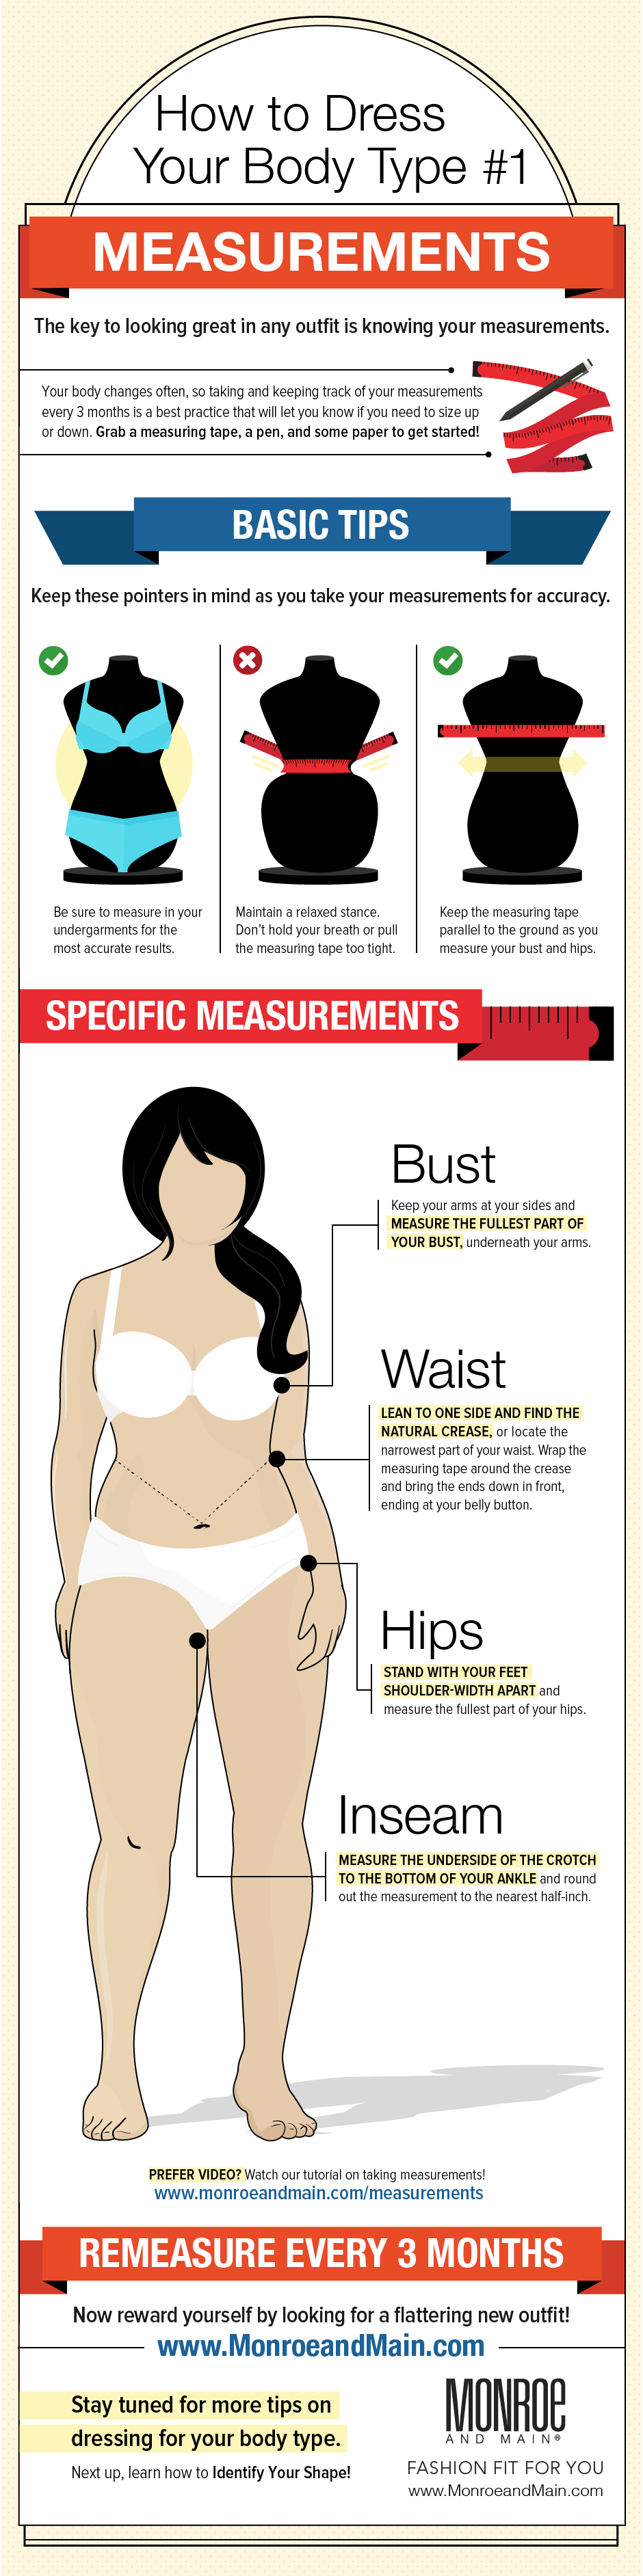 How To Take Body Measurements for a Dress